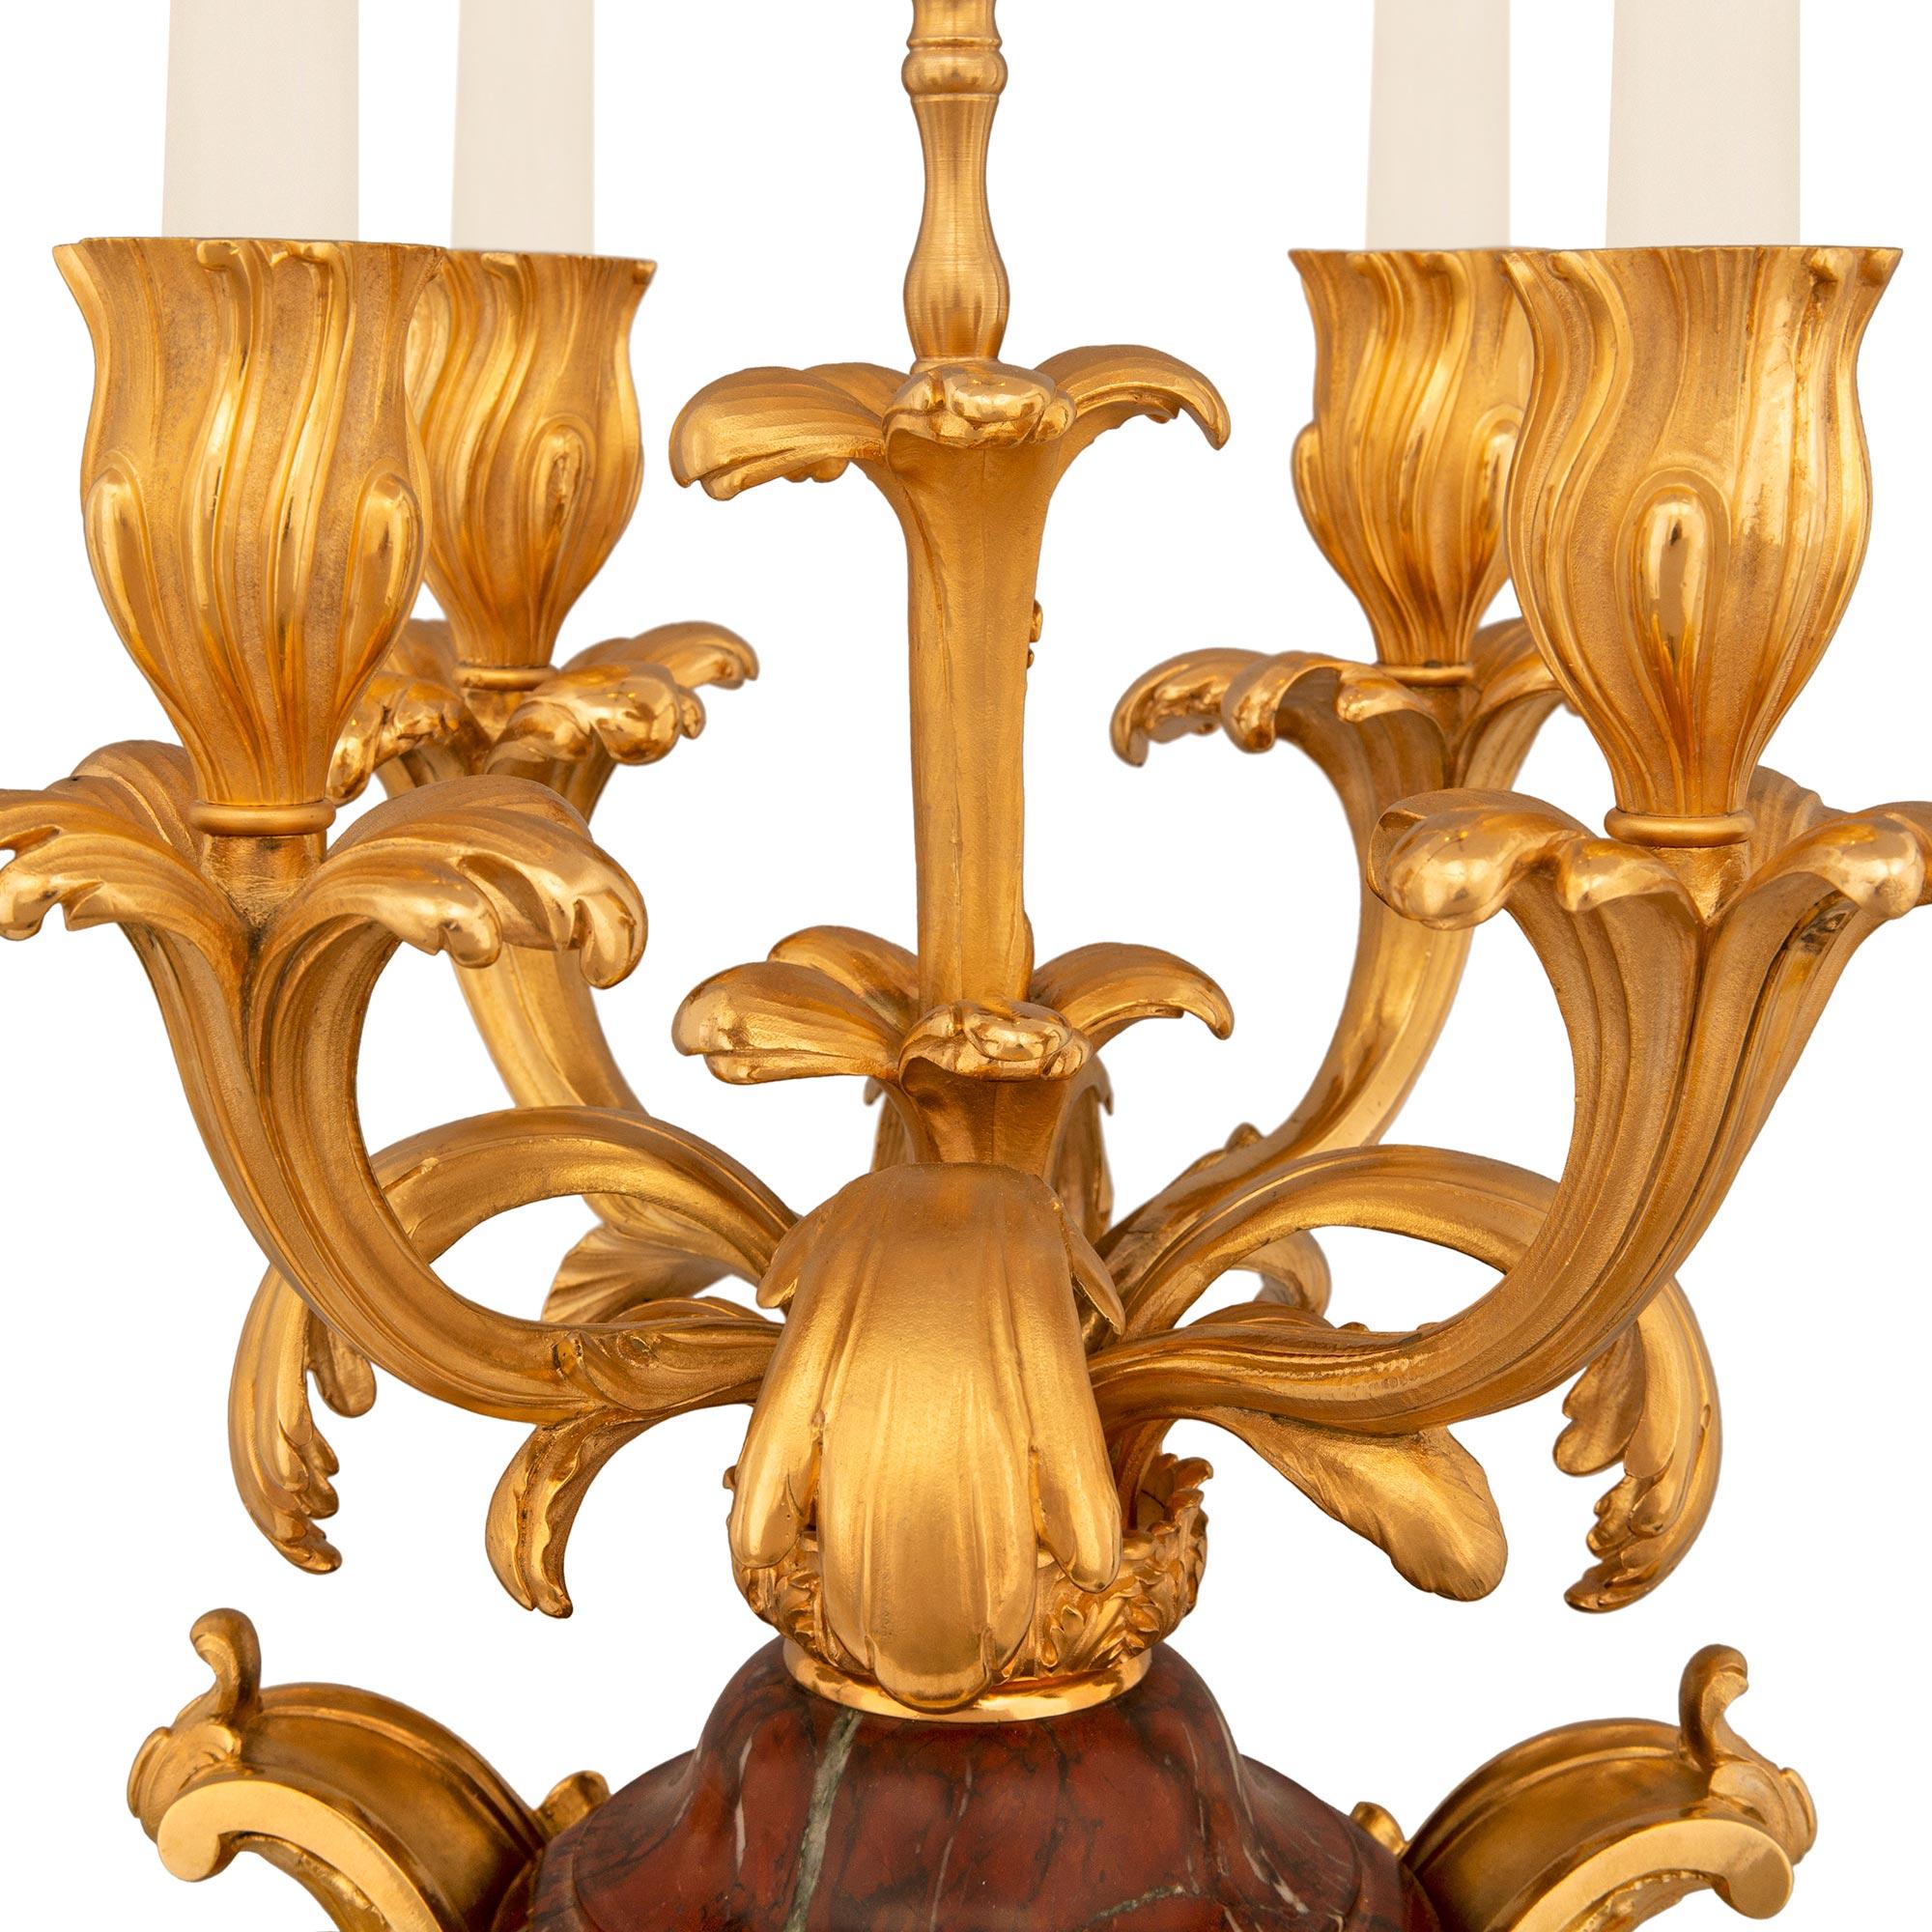 An extremely high quality and palatially scaled pair of French 19th century Belle Epoque Period Louis XV st. Rouge Griotte marble and Ormolu candelabras, attributed to F. Barbedienne. These exquisite four arm candelabras are raised by square bases